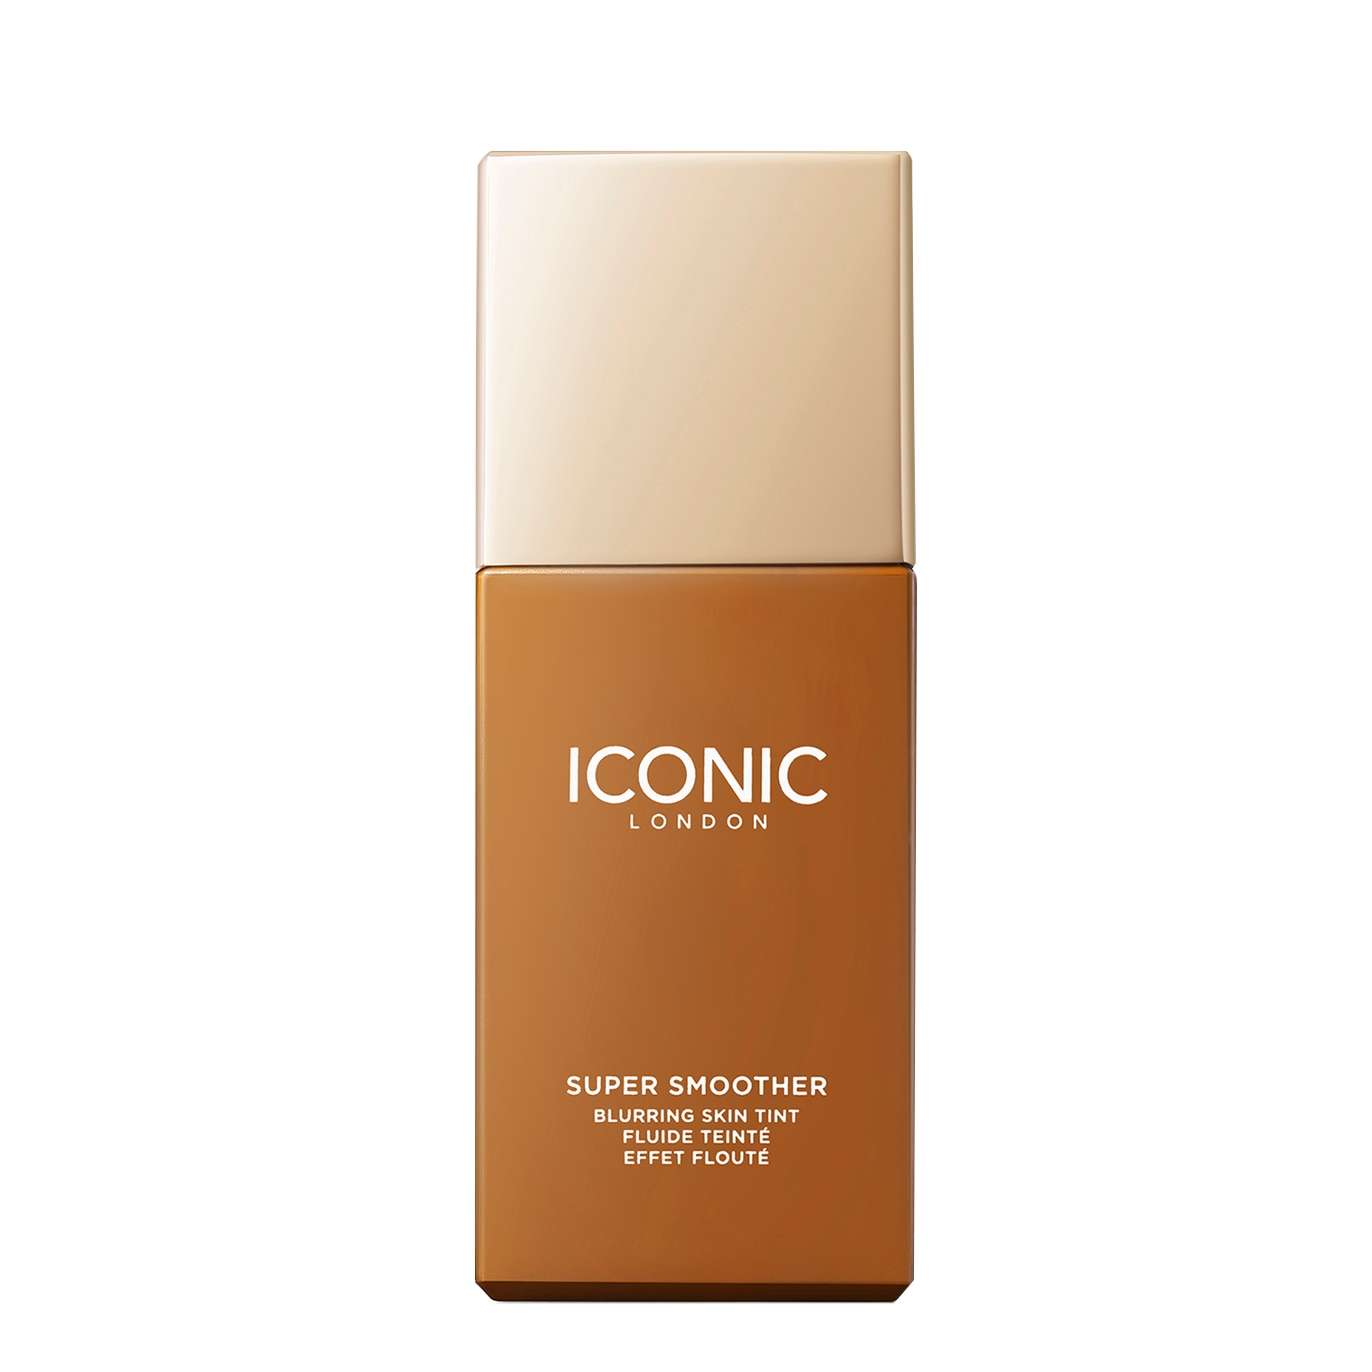 Iconic London Super Smoother Blurring Skin Tint - Colour Warm Deep